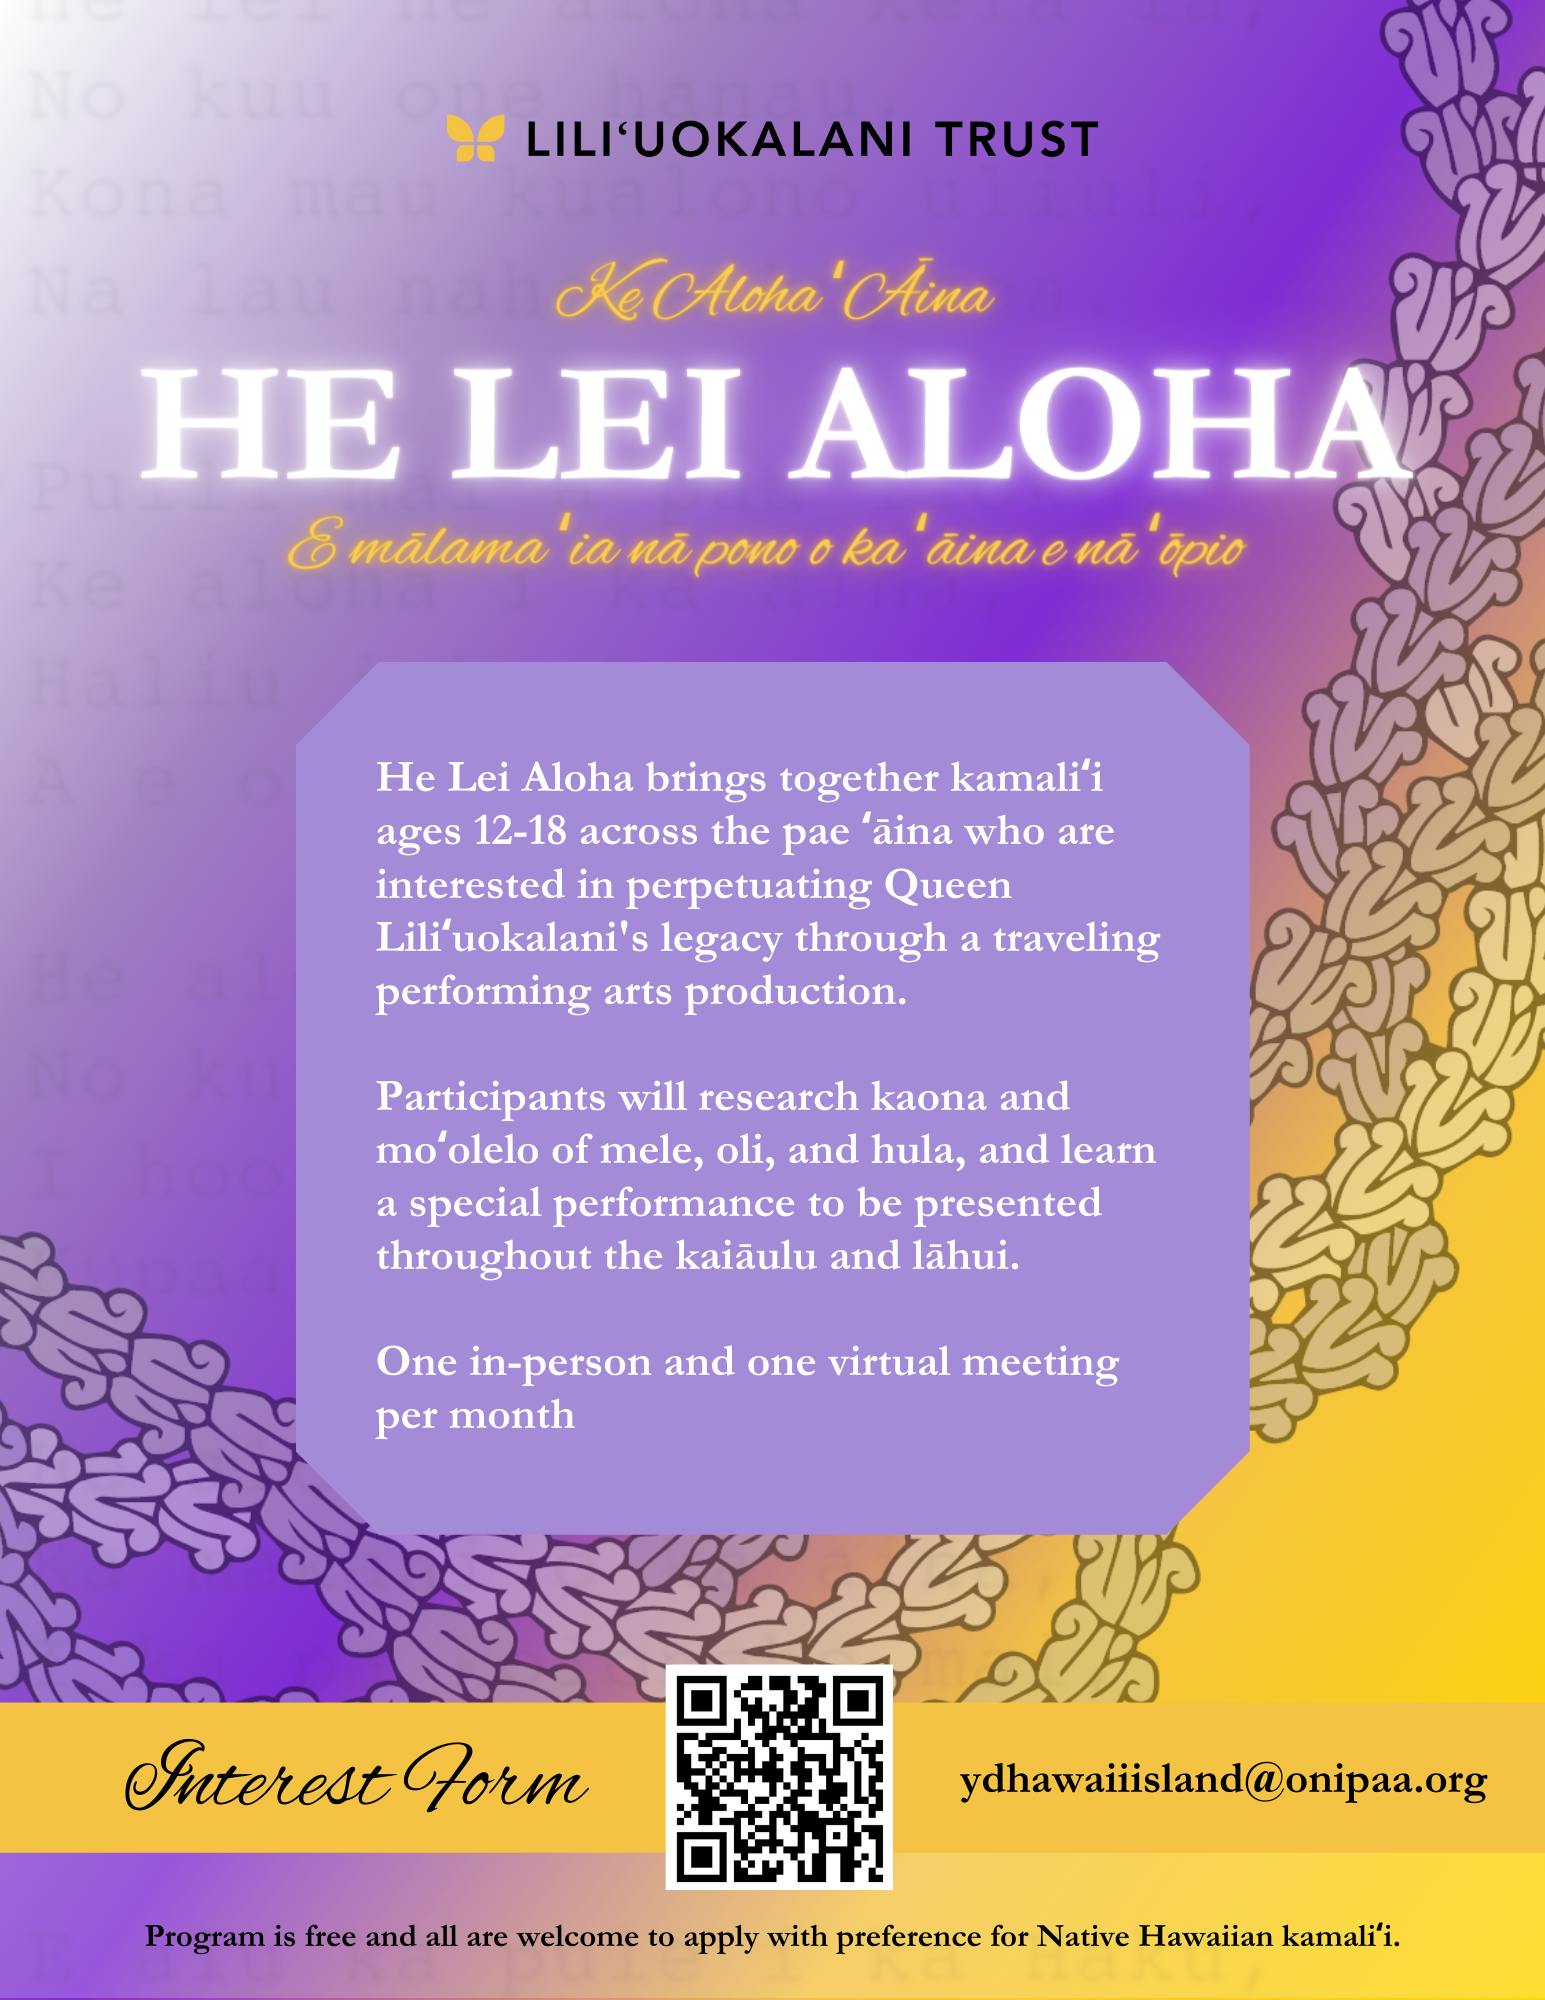 He Lei Aloha is an ongoing performing arts program to bring a special performance to the islands.